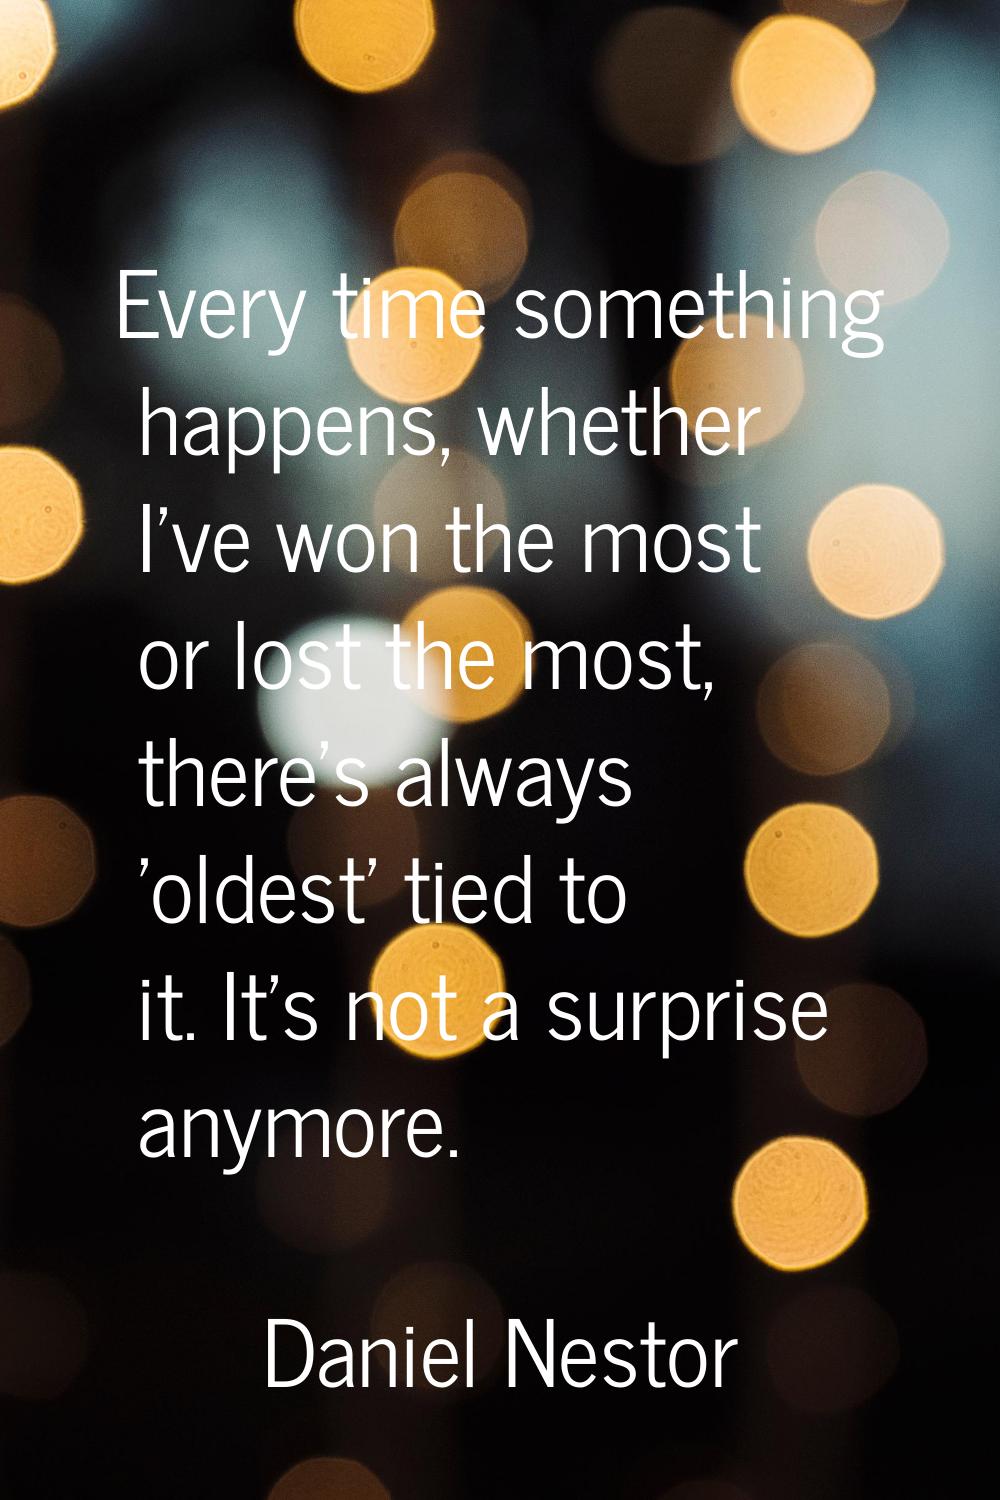 Every time something happens, whether I've won the most or lost the most, there's always 'oldest' t